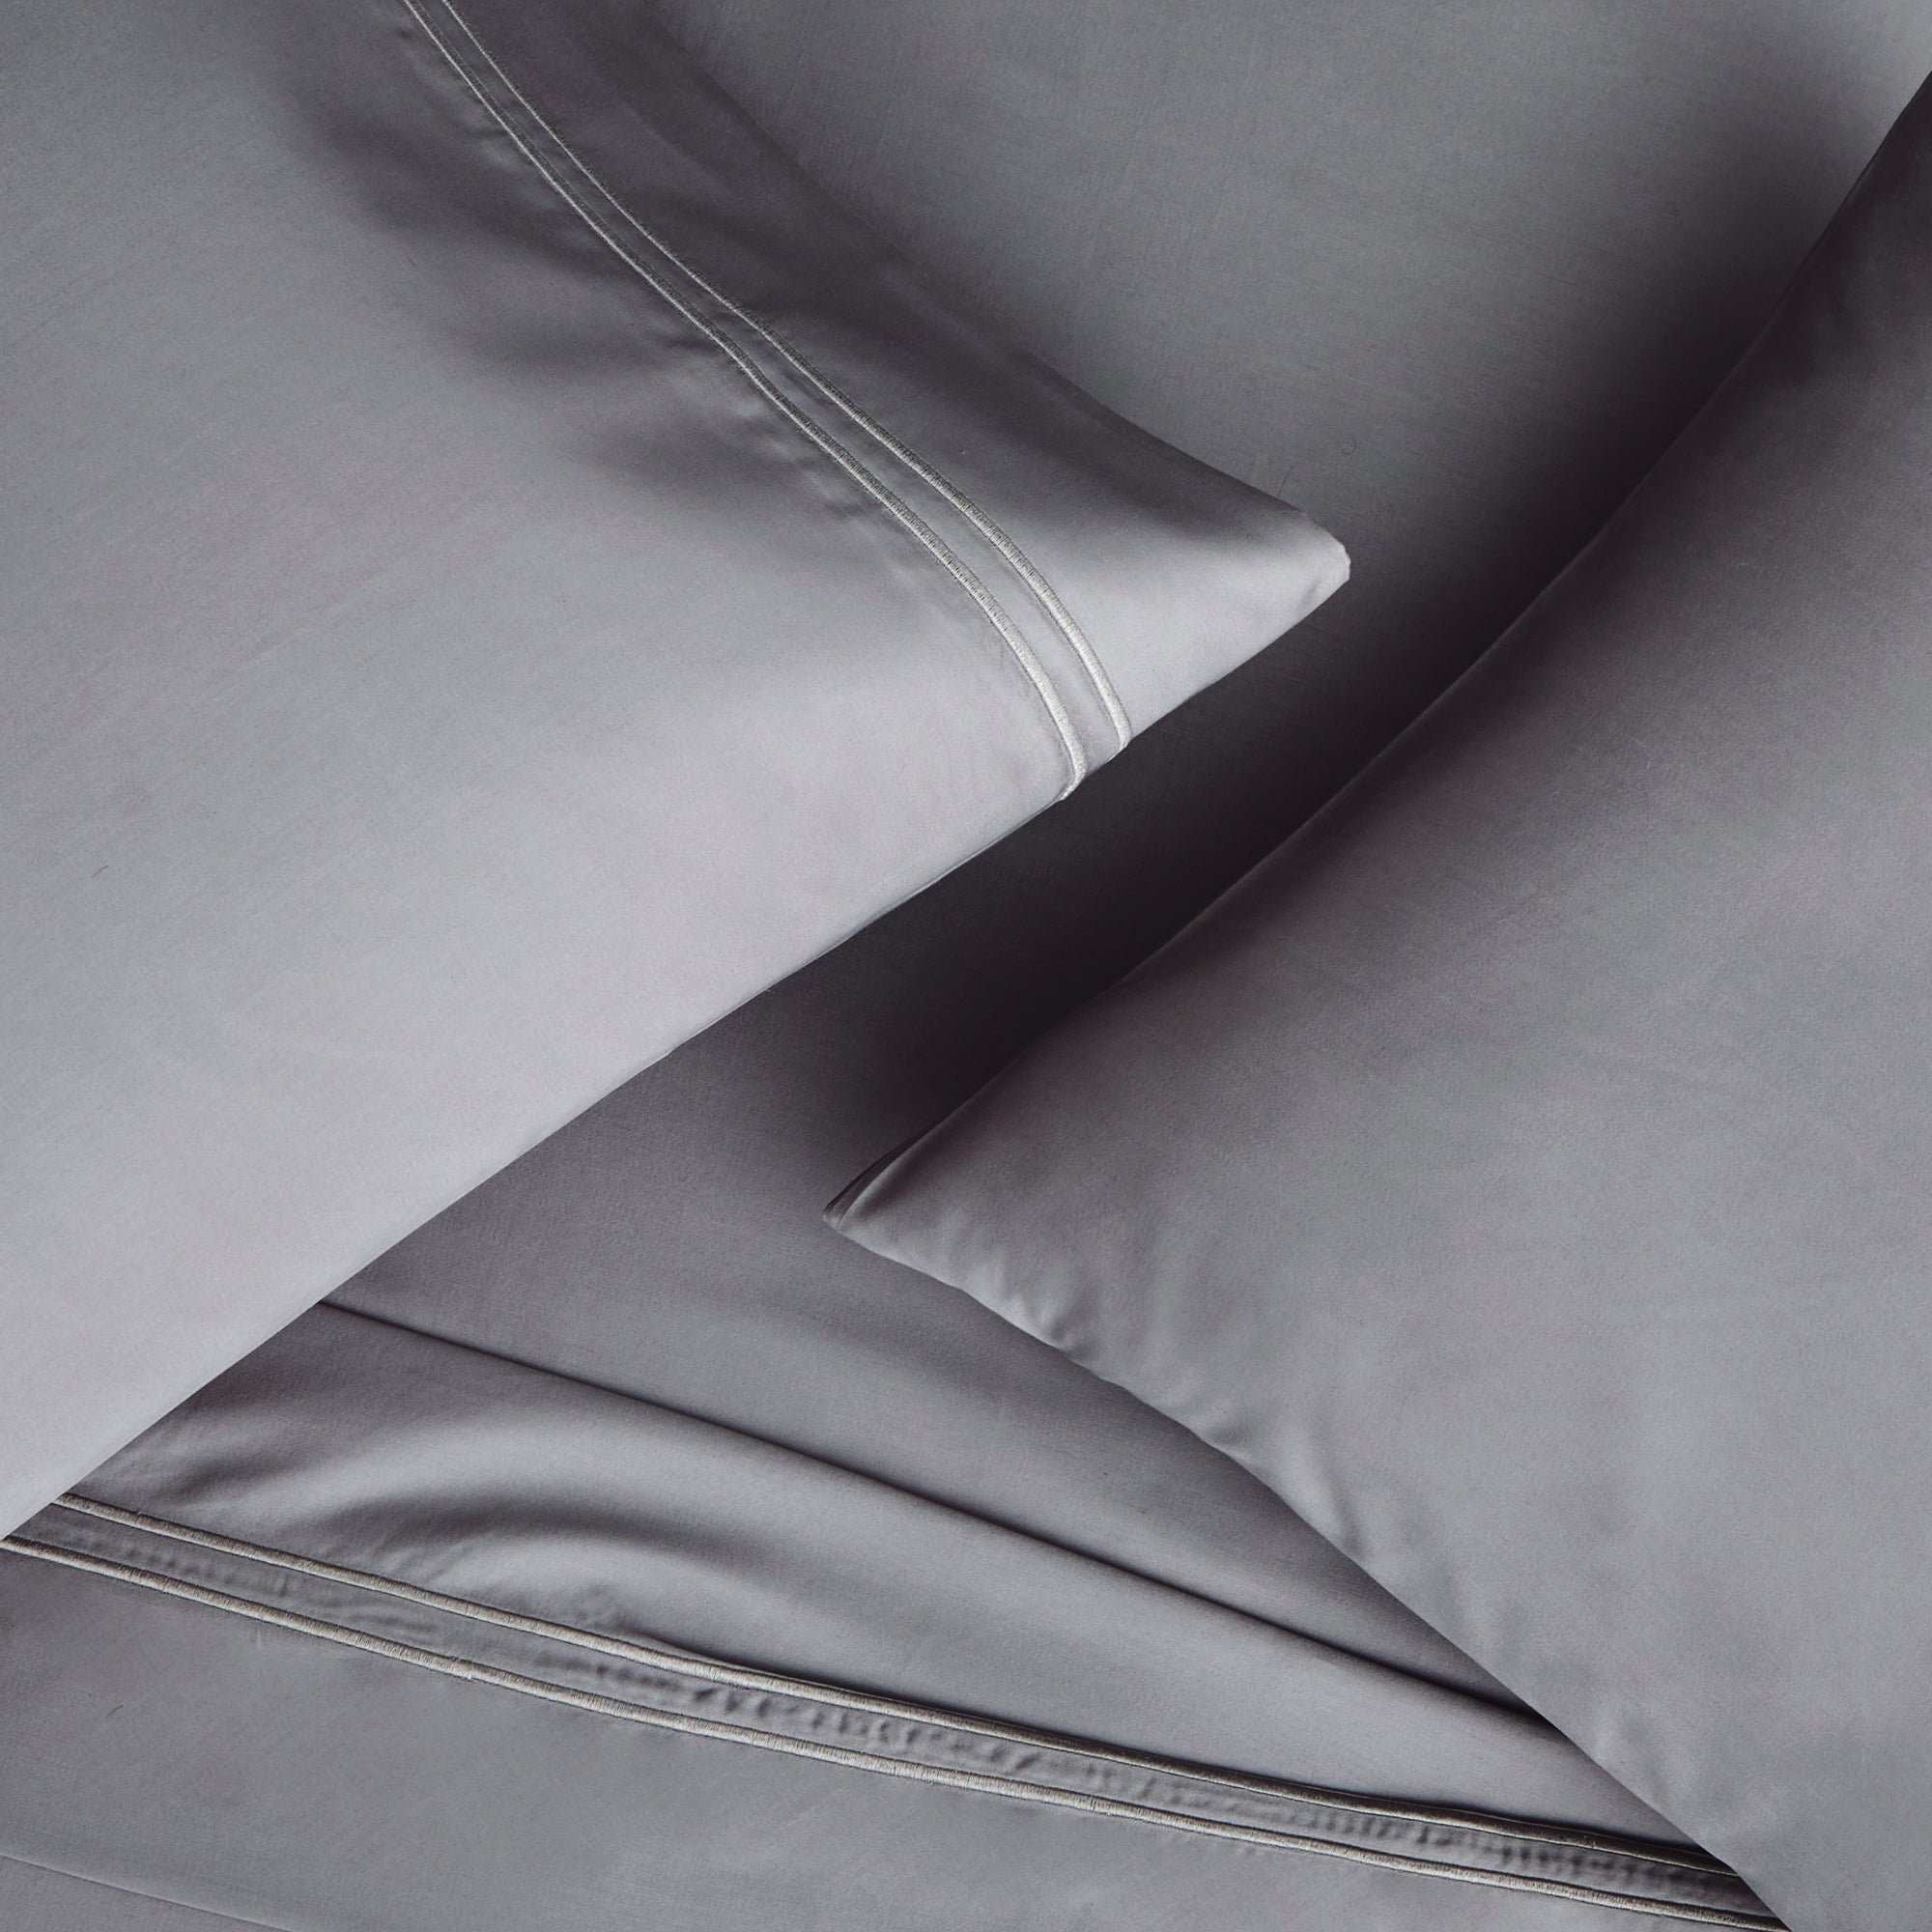 SLEEP EASY ON HYGGECAVE™ SUSTAINABLE BEDDING - HYGGE CAVE